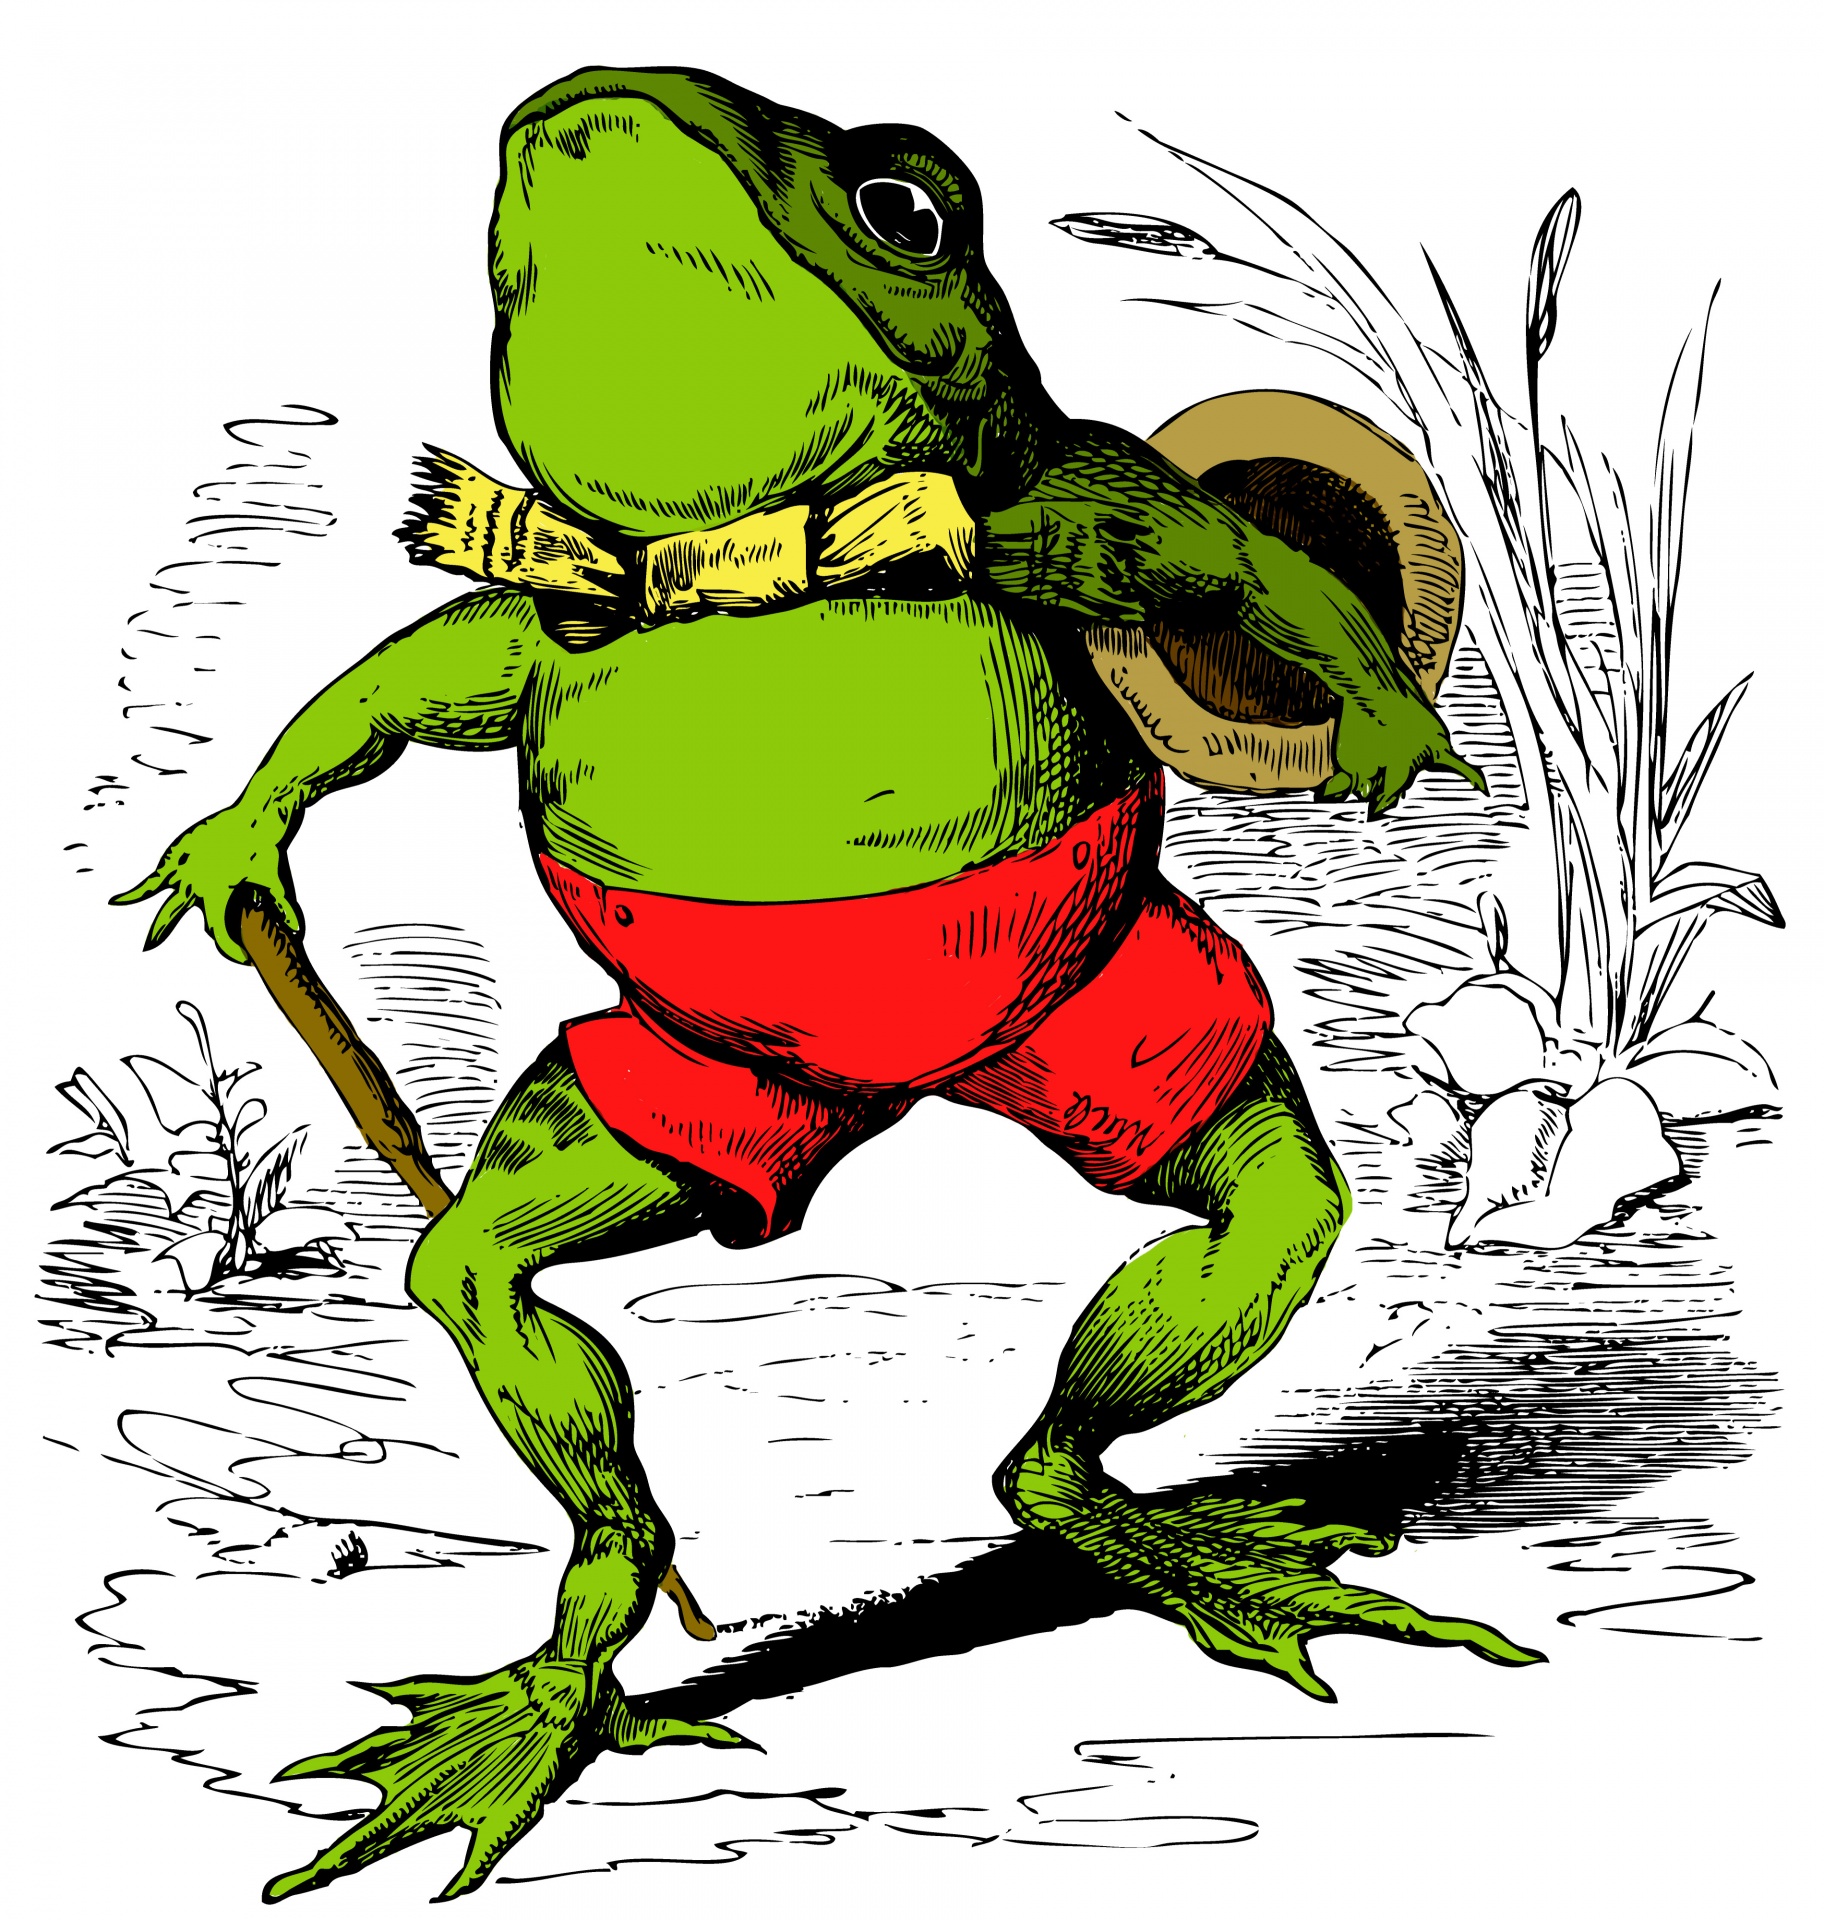 Vintage drawing of a cartoon frog that I have colored in to give it a more modern, bright feel